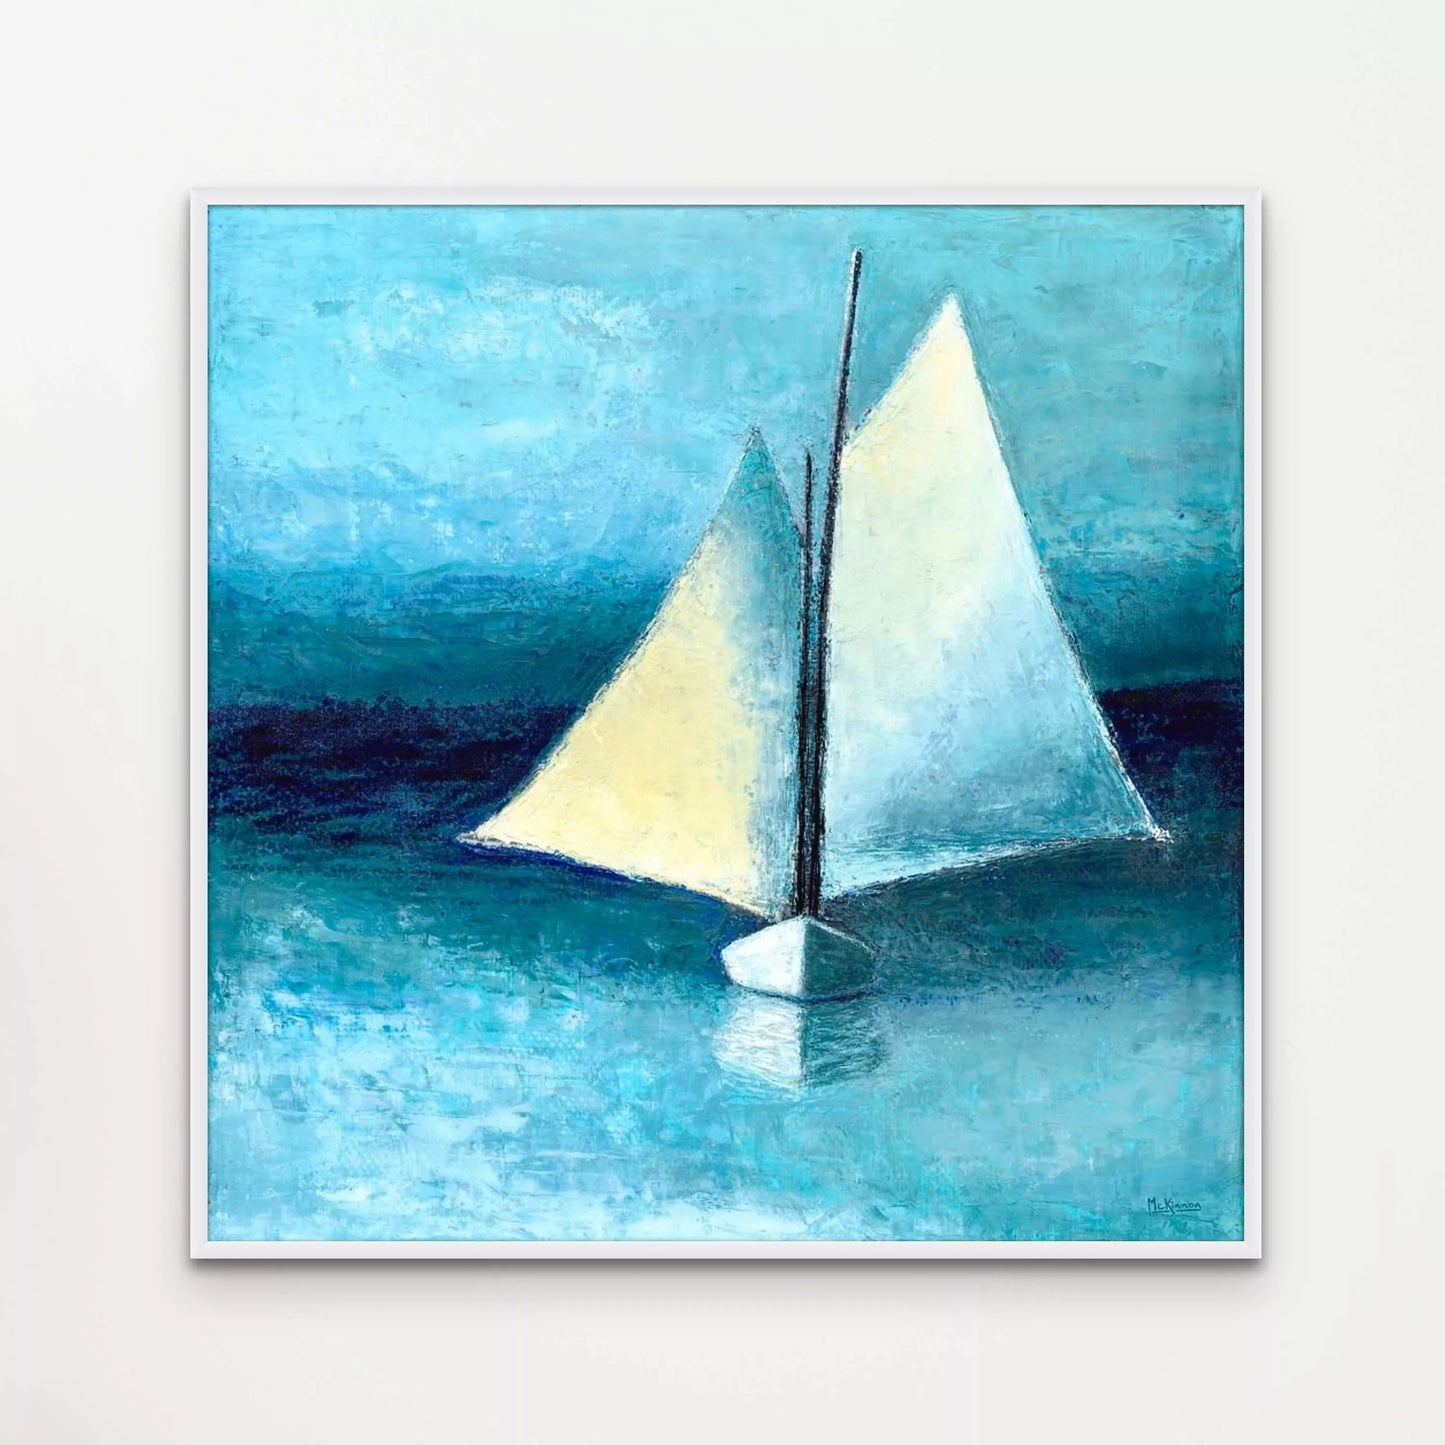 A minimalist sailboat painting of a square-rigged schooner under sail. This giclee print of the artwork is framed in white and mounted on a white wall. Sky and water are a muted sky blue, the sails are off-white and the hull is white. There is dark band of navy blue paint at the horizon. This giclee print of the artwork is framed in white and mounted on a white wall.